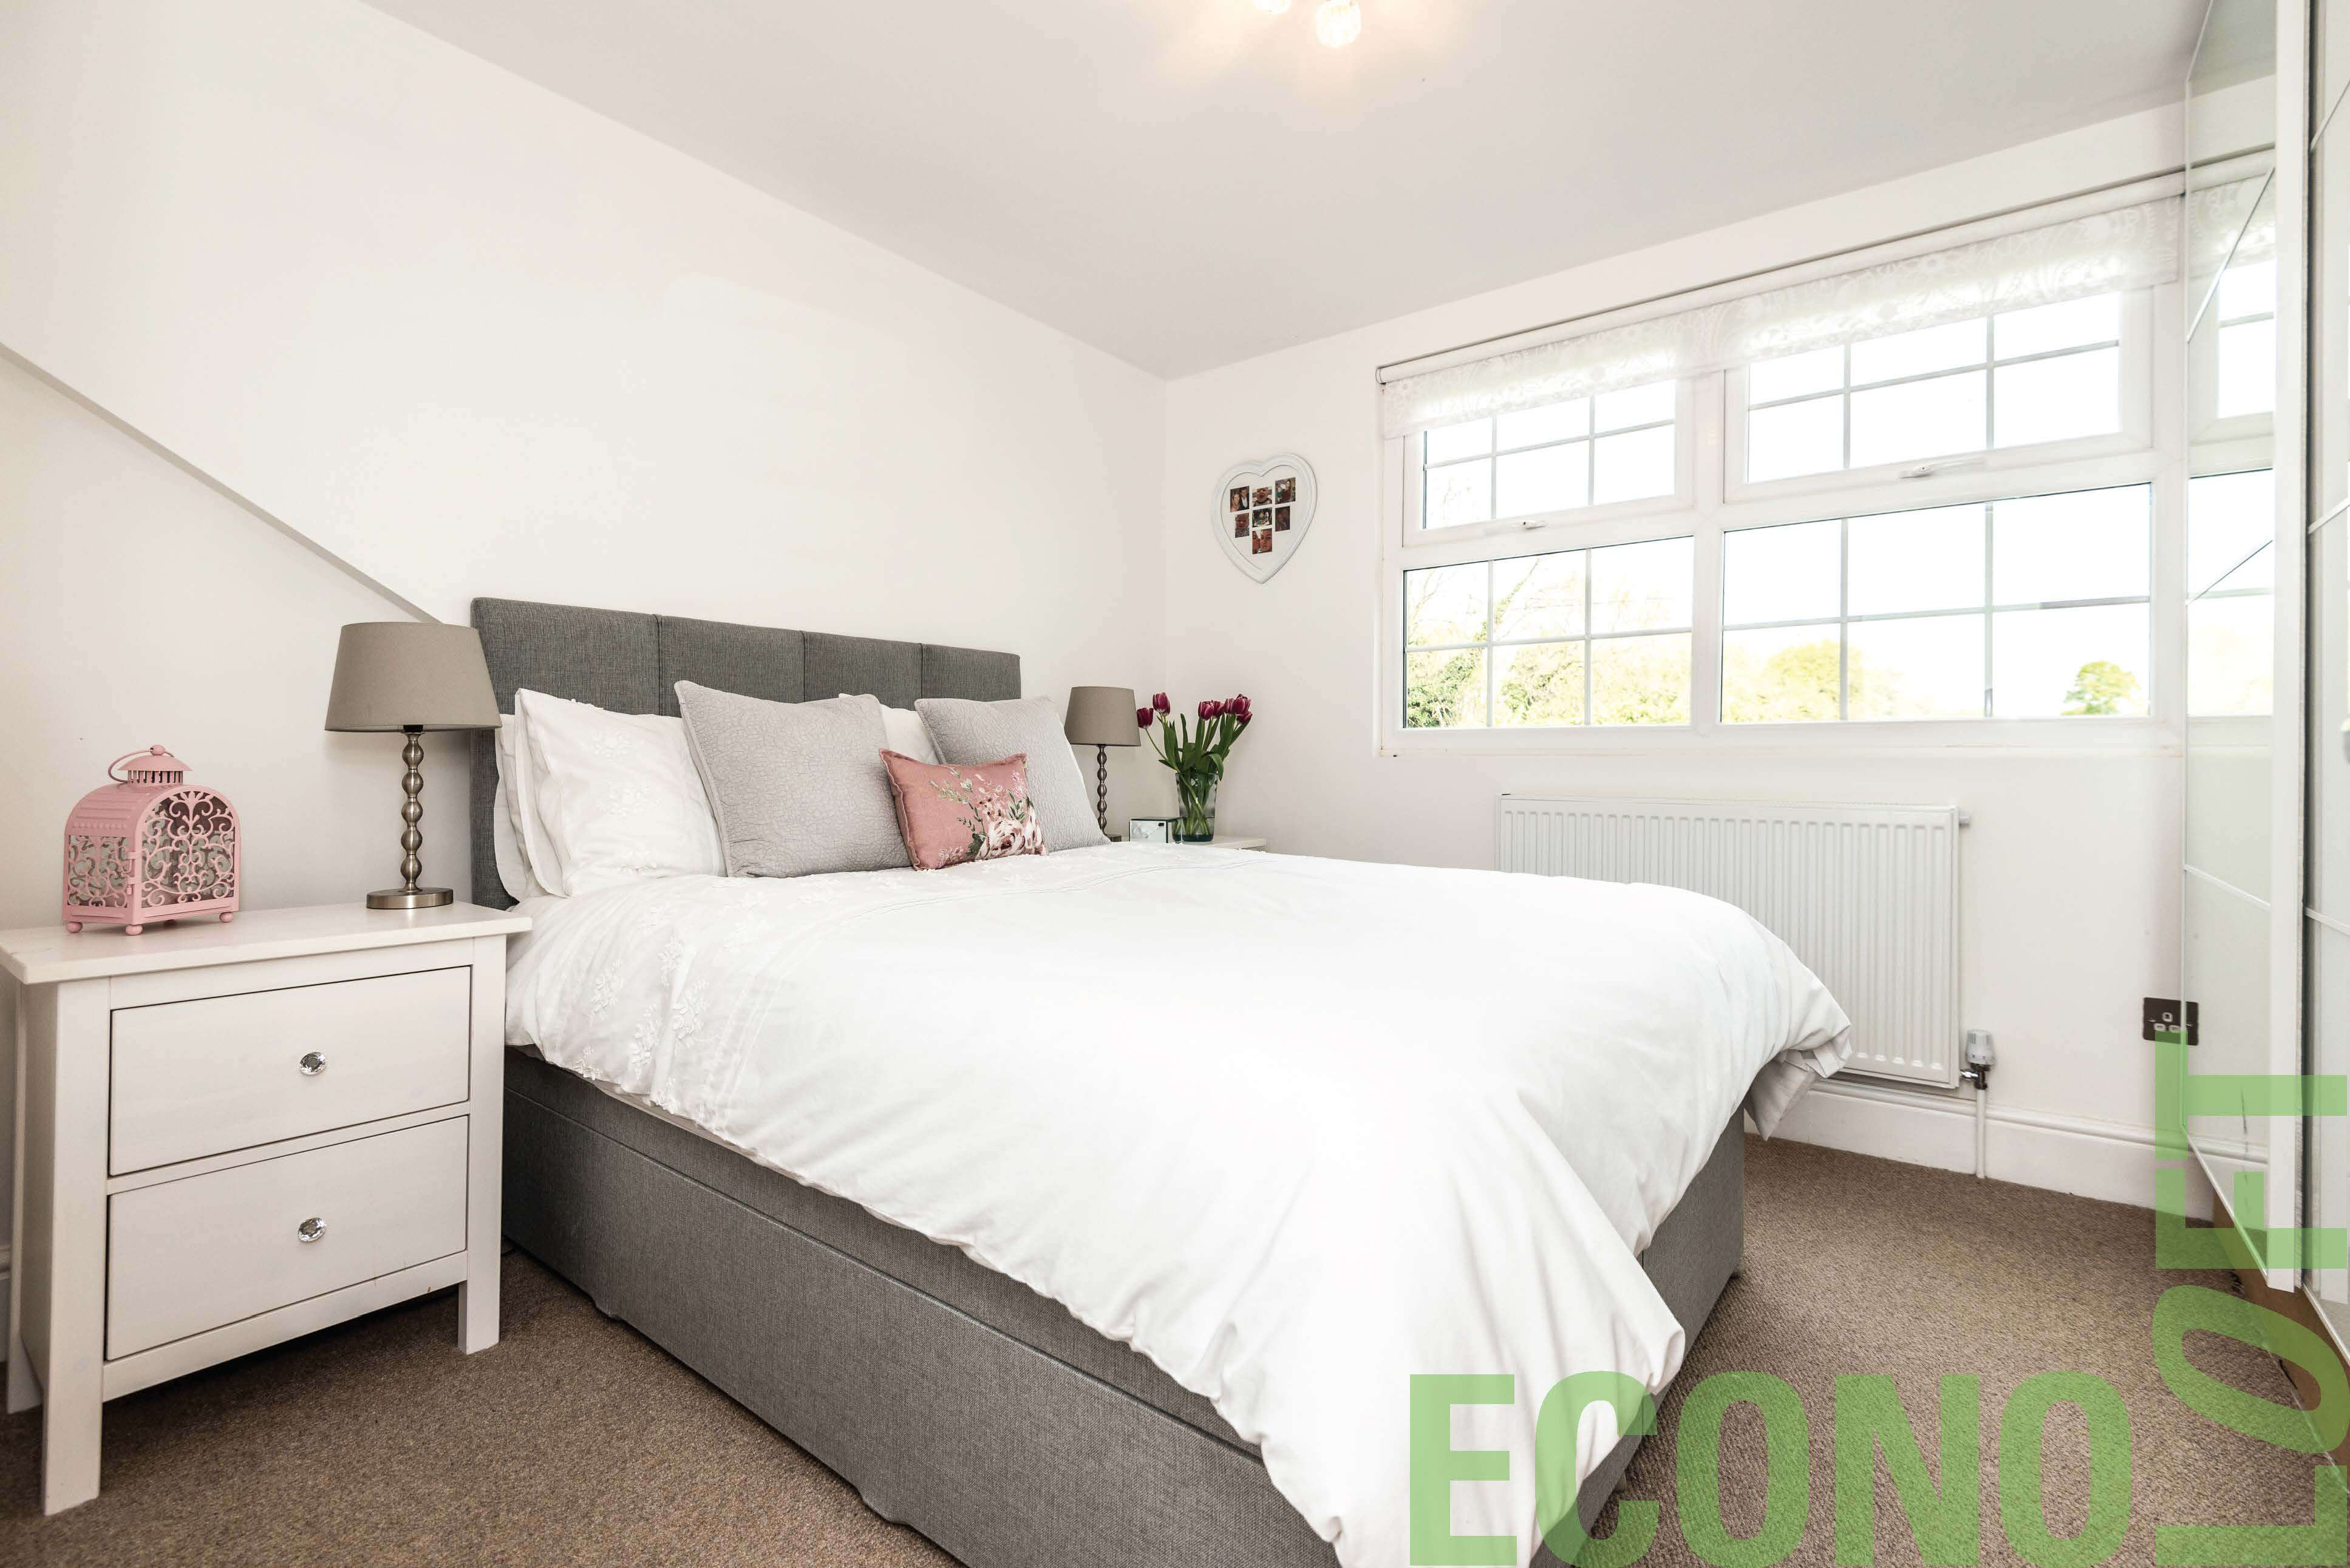 A beautiful guest room installed by Econoloft